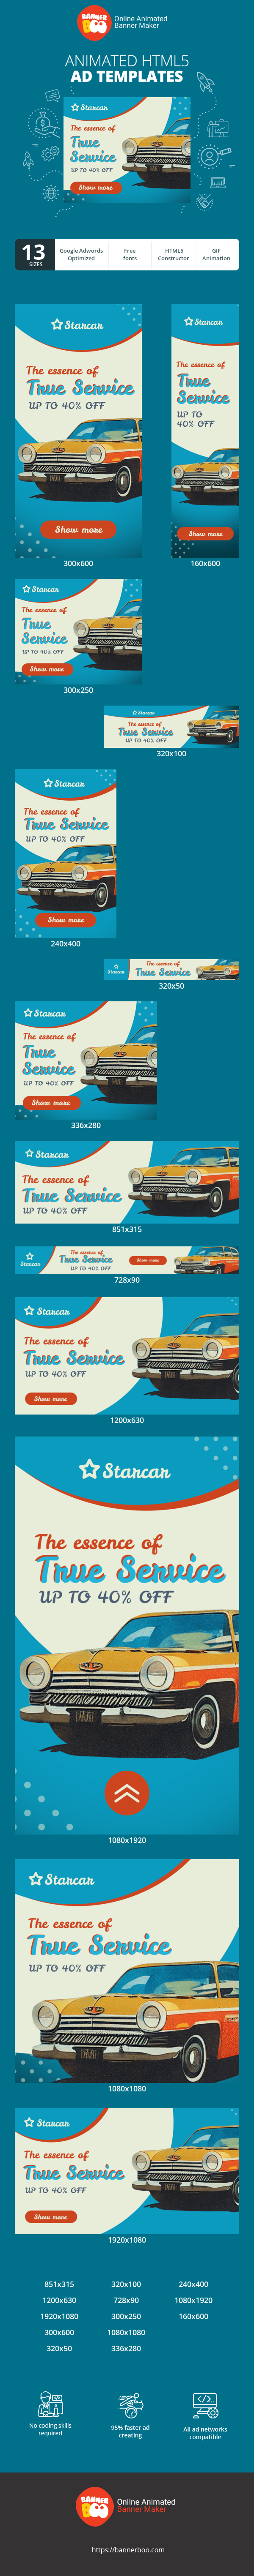 Banner ad template — The Essence Of True Service — Up To 40% Off